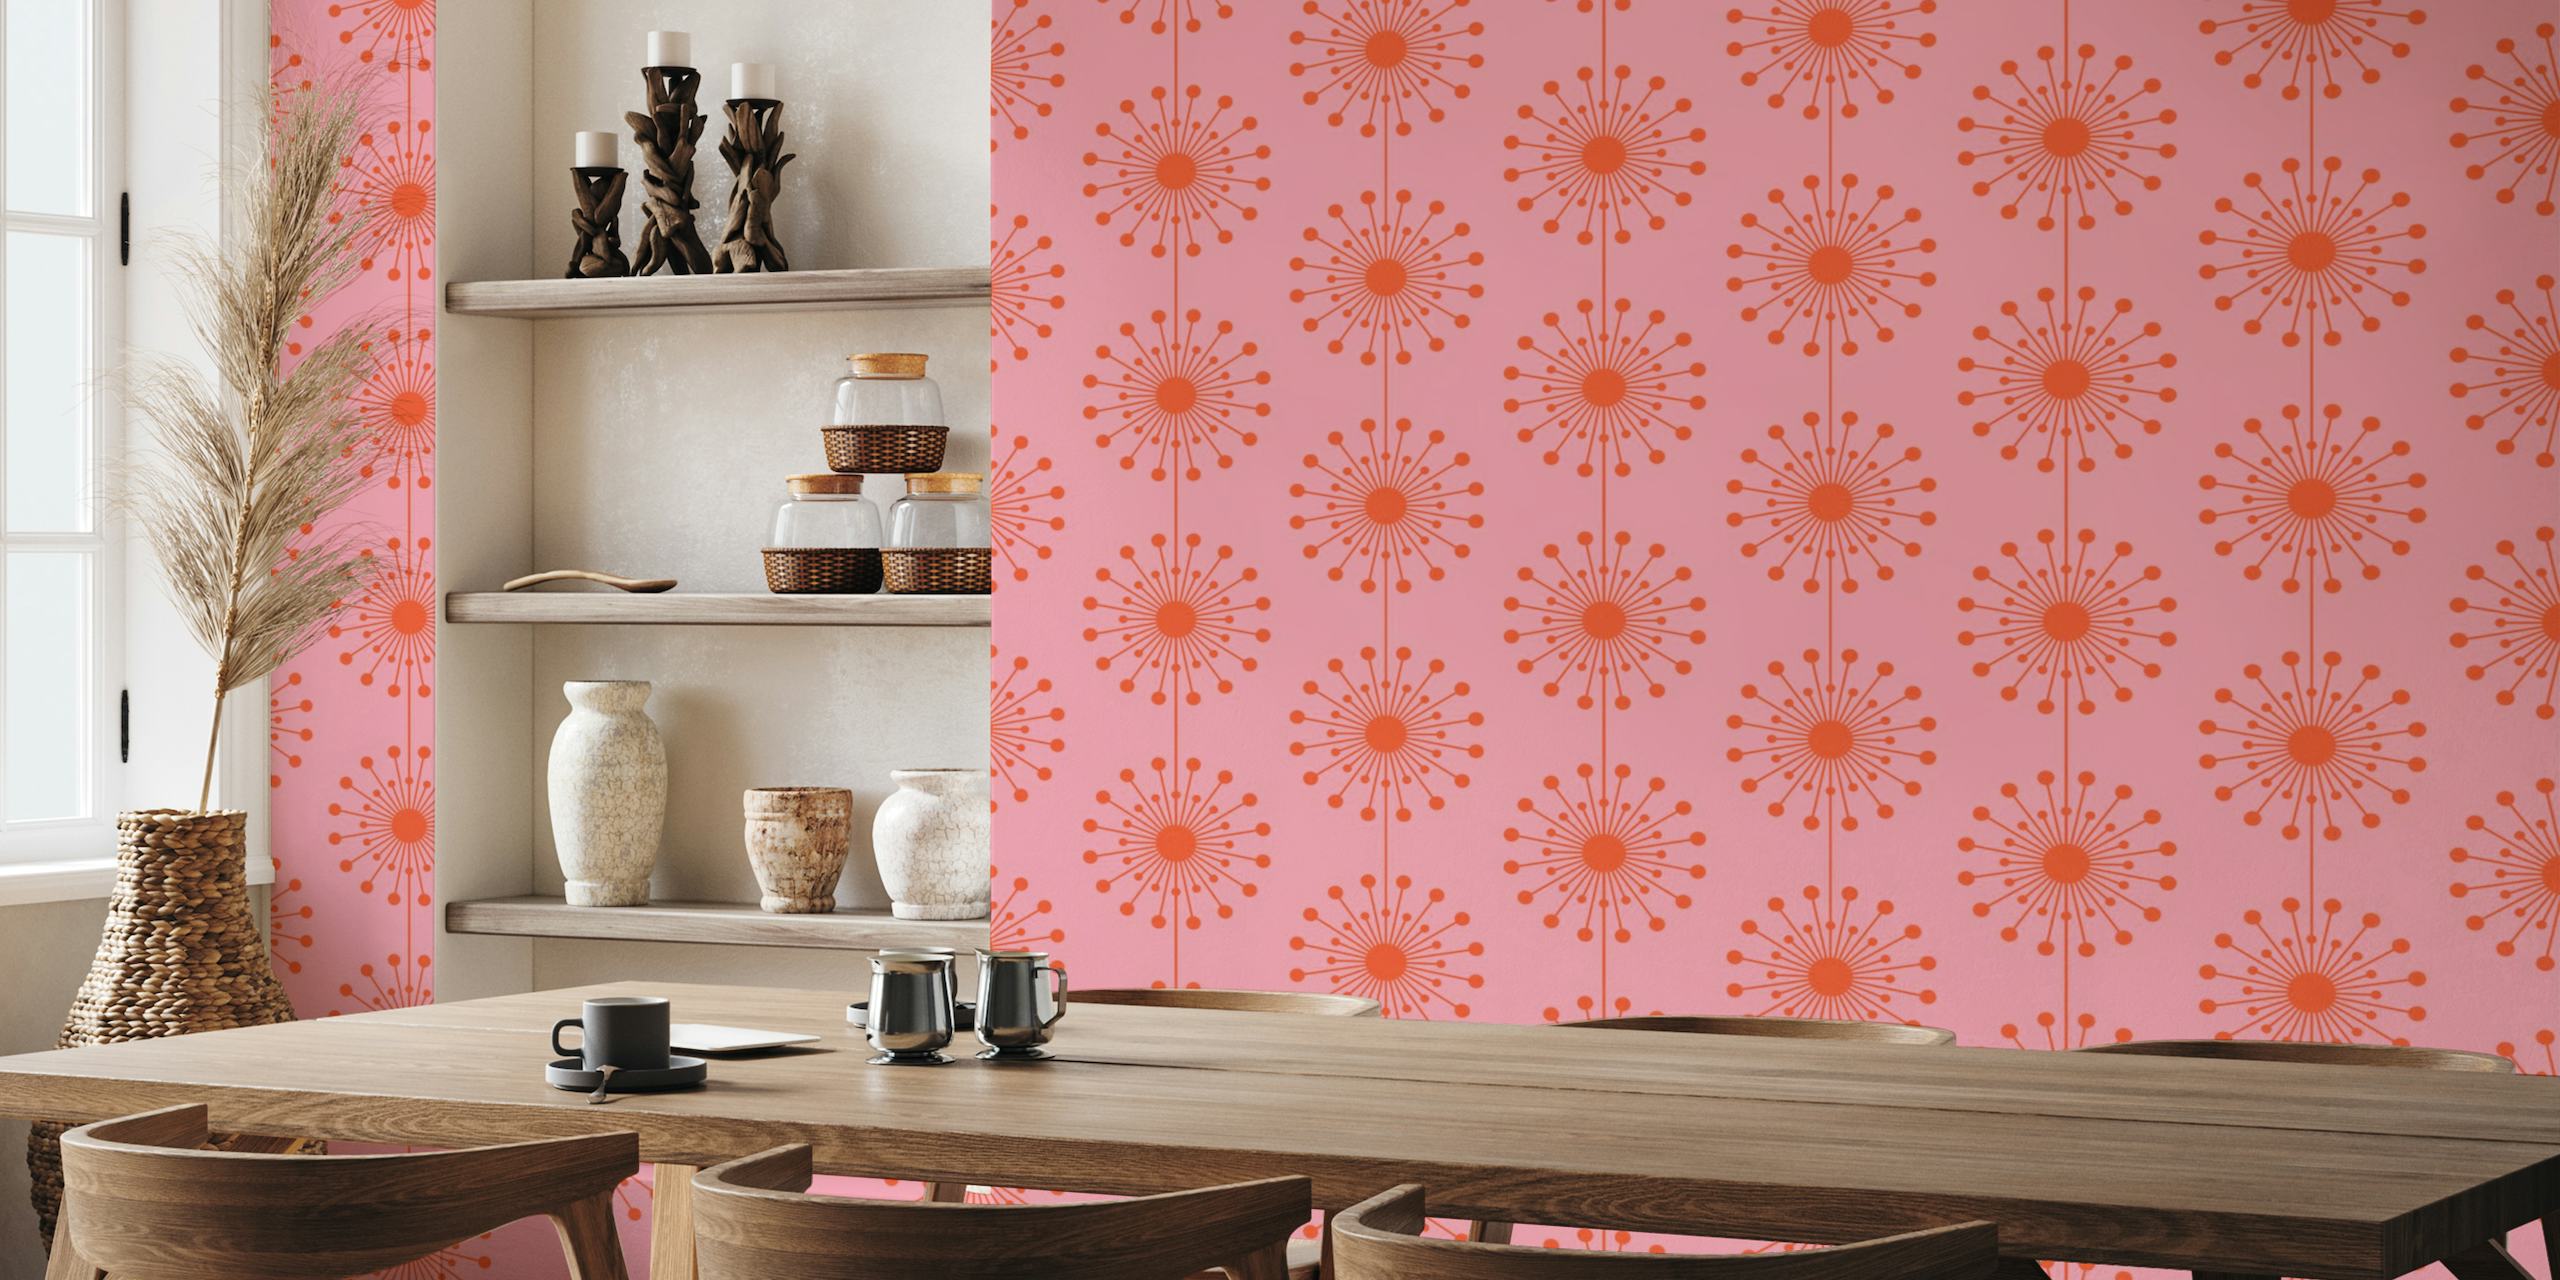 Midcentury modern style dandelion pattern in pink and orange on a wall mural